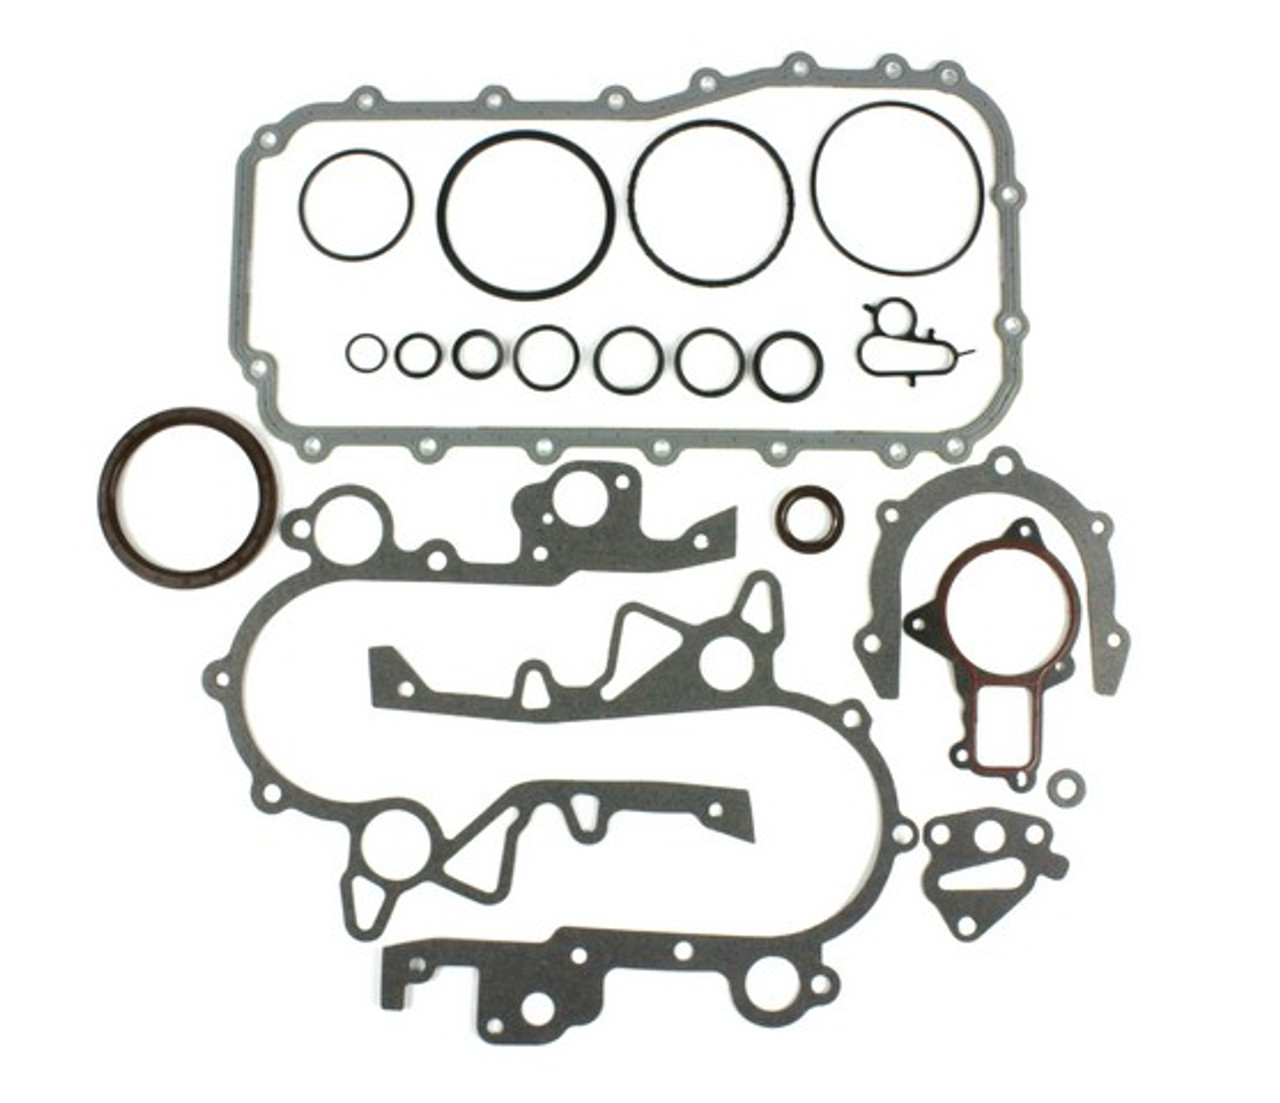 Lower Gasket Set 3.3L 1993 Plymouth Voyager - LGS1135.158